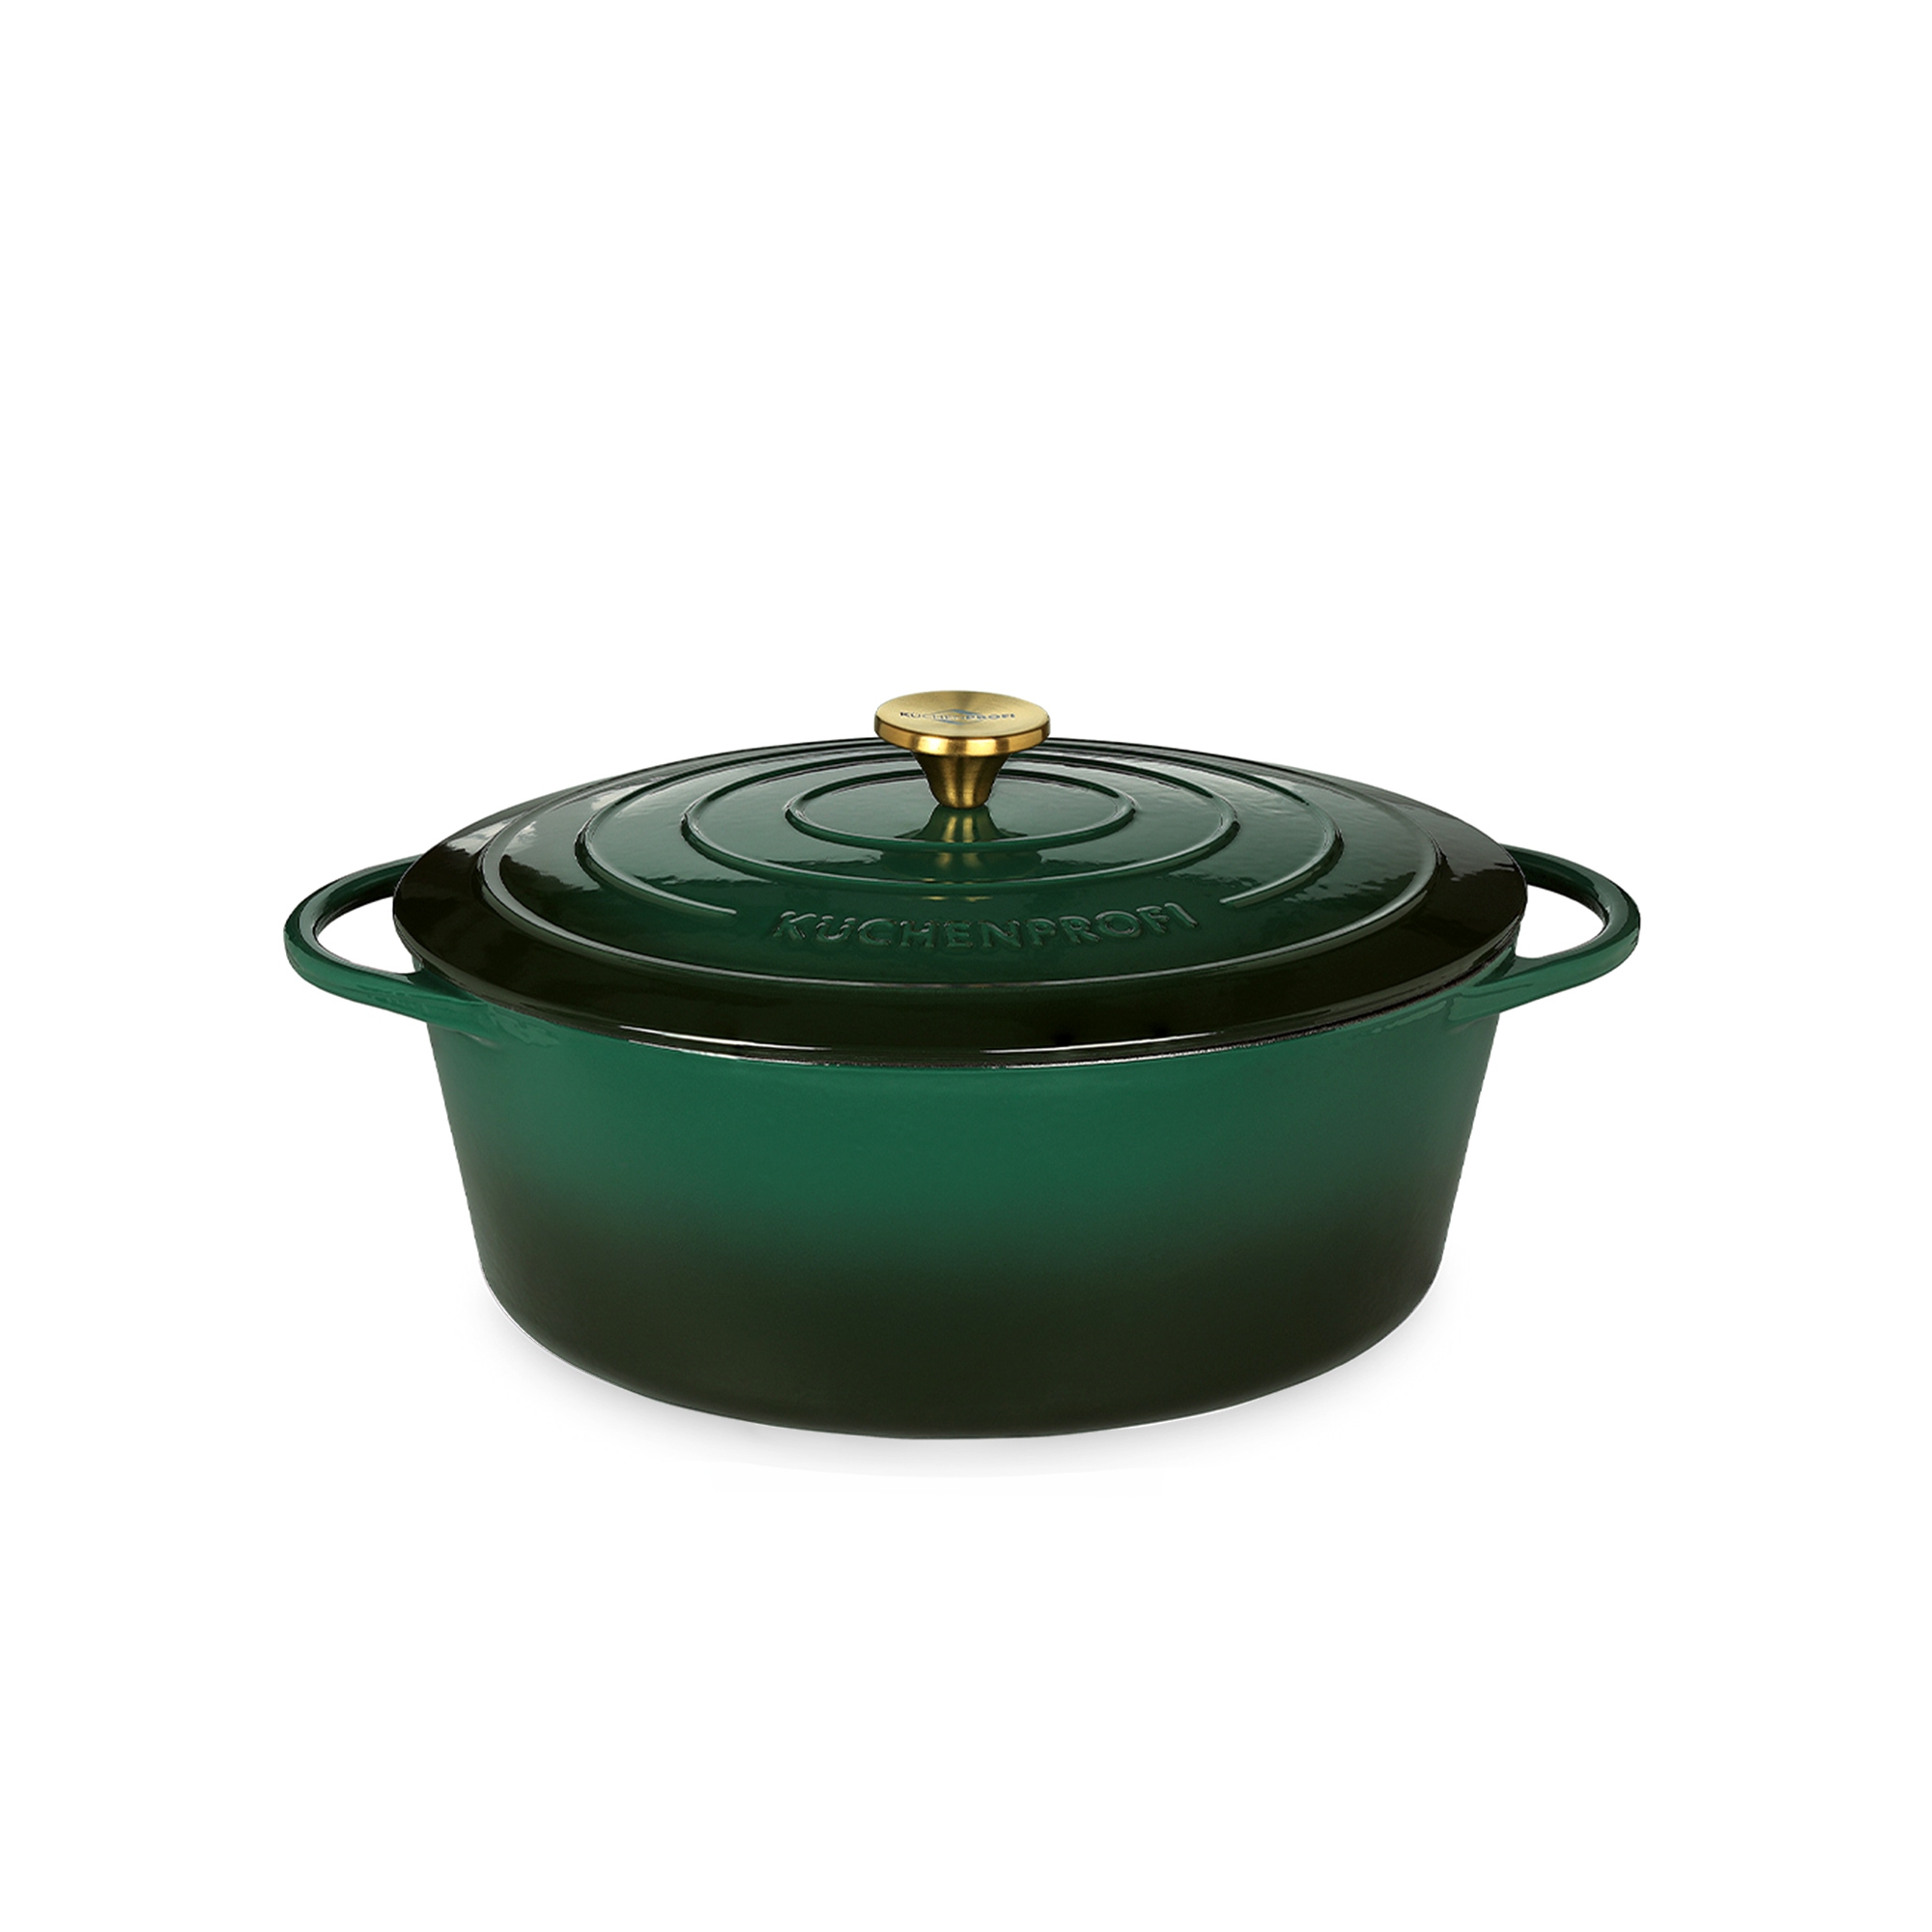 Küchenprofi - PROVENCE - oval French Oven - racing green